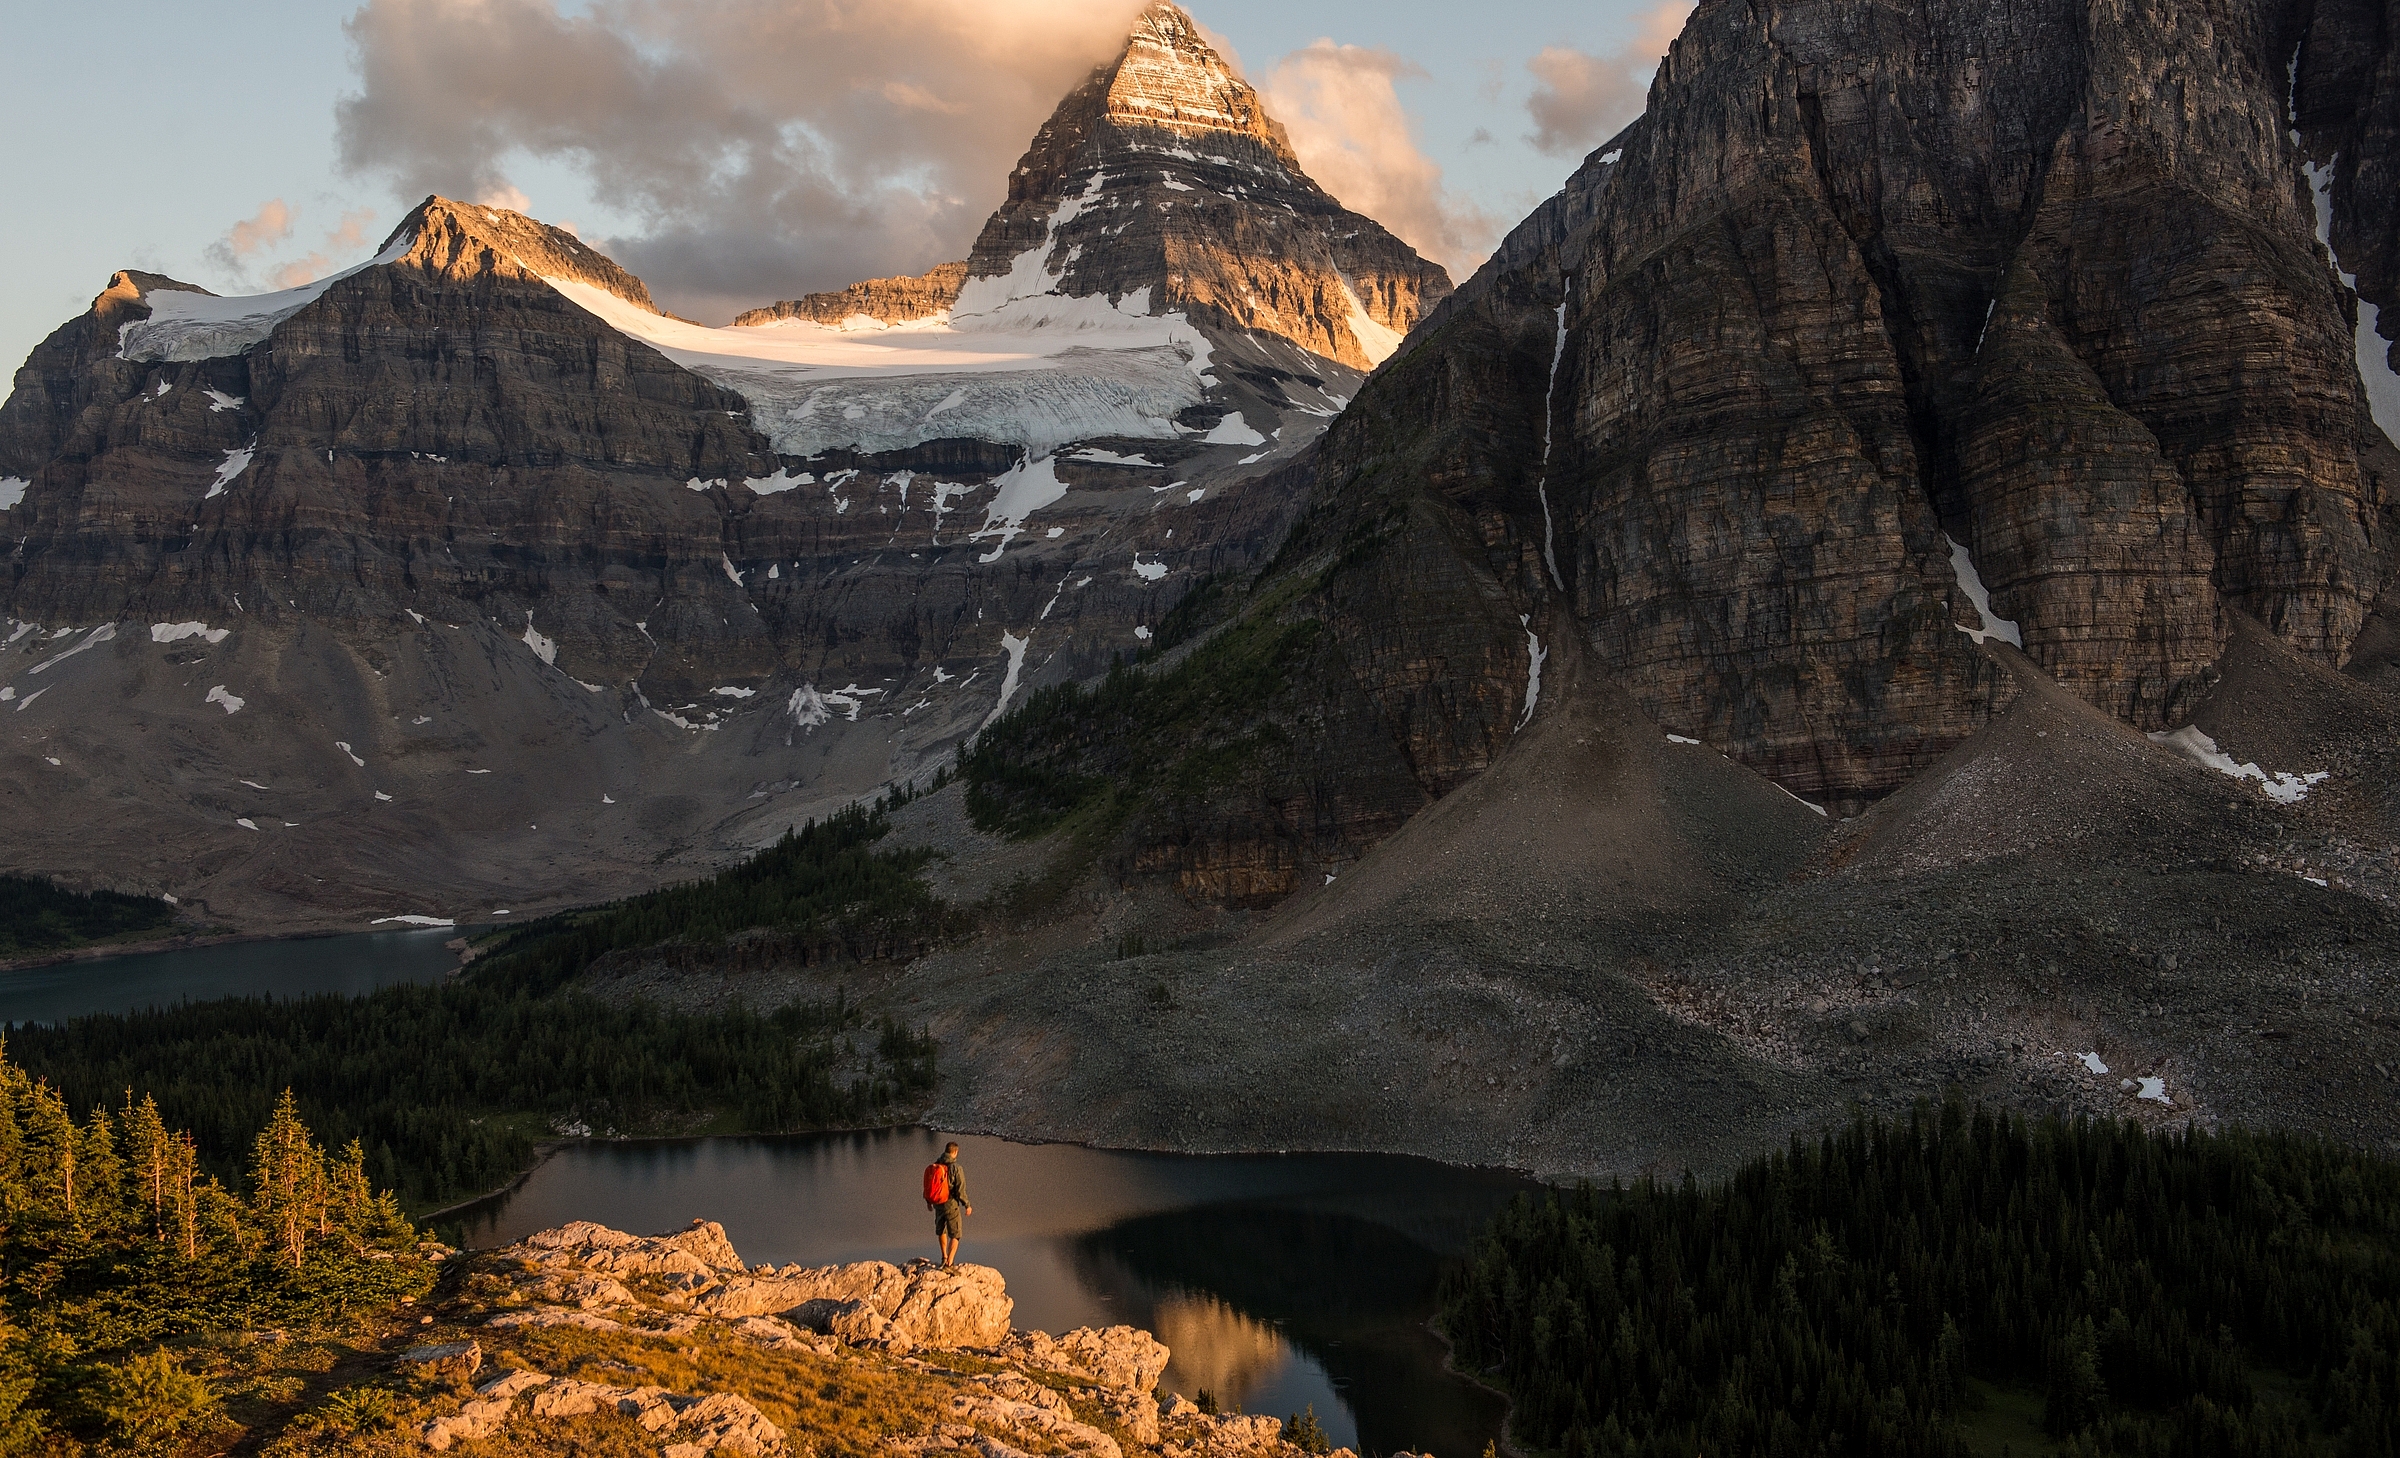 A hiker on the trail to Nublet and Nub Peak, with views of Lake Magog, Sunburst Lake and Mt Assiniboine